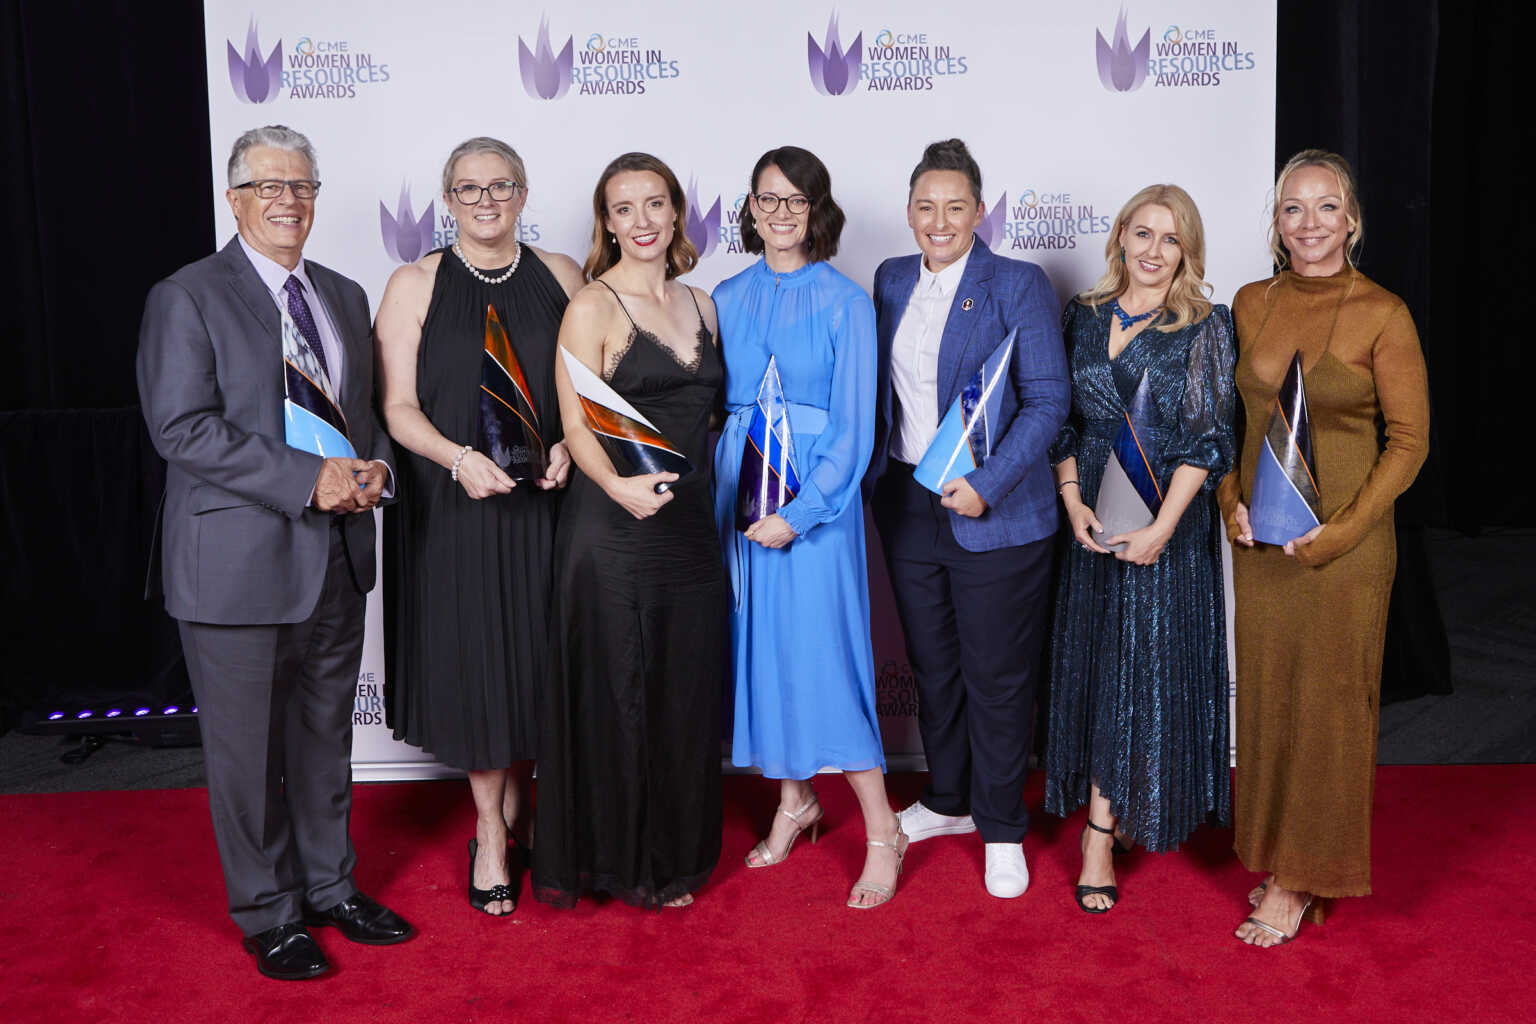 CME's 2023 Women in Resources Awards winners announced The Chamber of